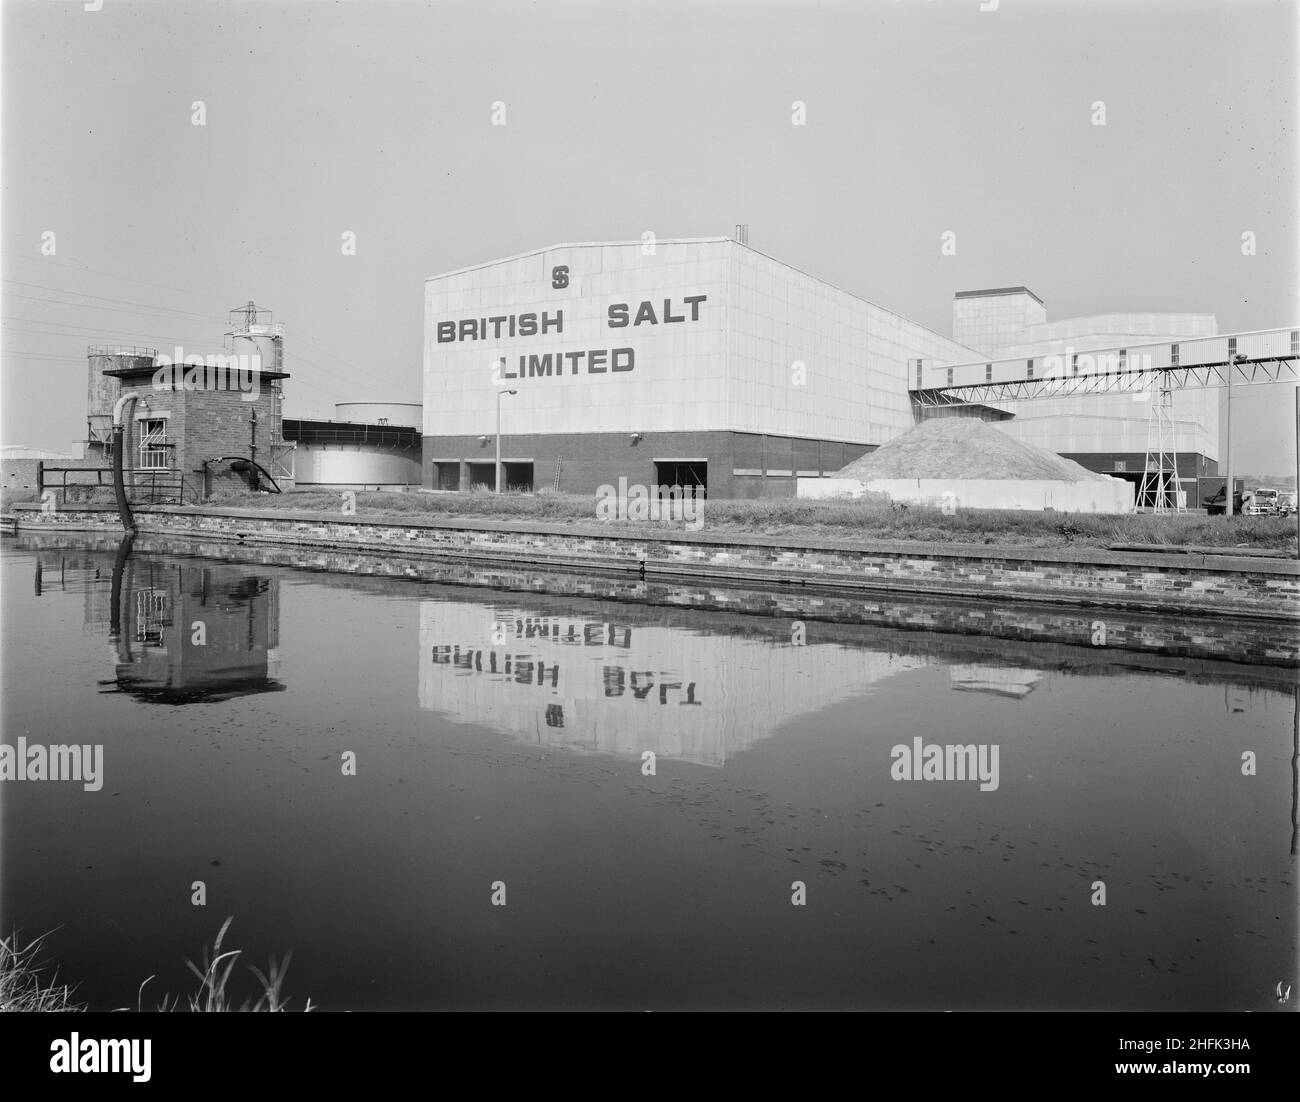 British Salt Factory, Faulkner Lane, Middlewich, Cheshire, 20/09/1971. A view from across the Trent &amp; Mersey Canal of the main processing building at the British Salt factory. Work began on site on the 16th of April 1968 and was completed in early June 1969 with the factory officially opened by the Duke of Edinburgh on the 25th. Laing returned to the site in 1971 to construct an extension to the undried vacuum salt building. Stock Photo